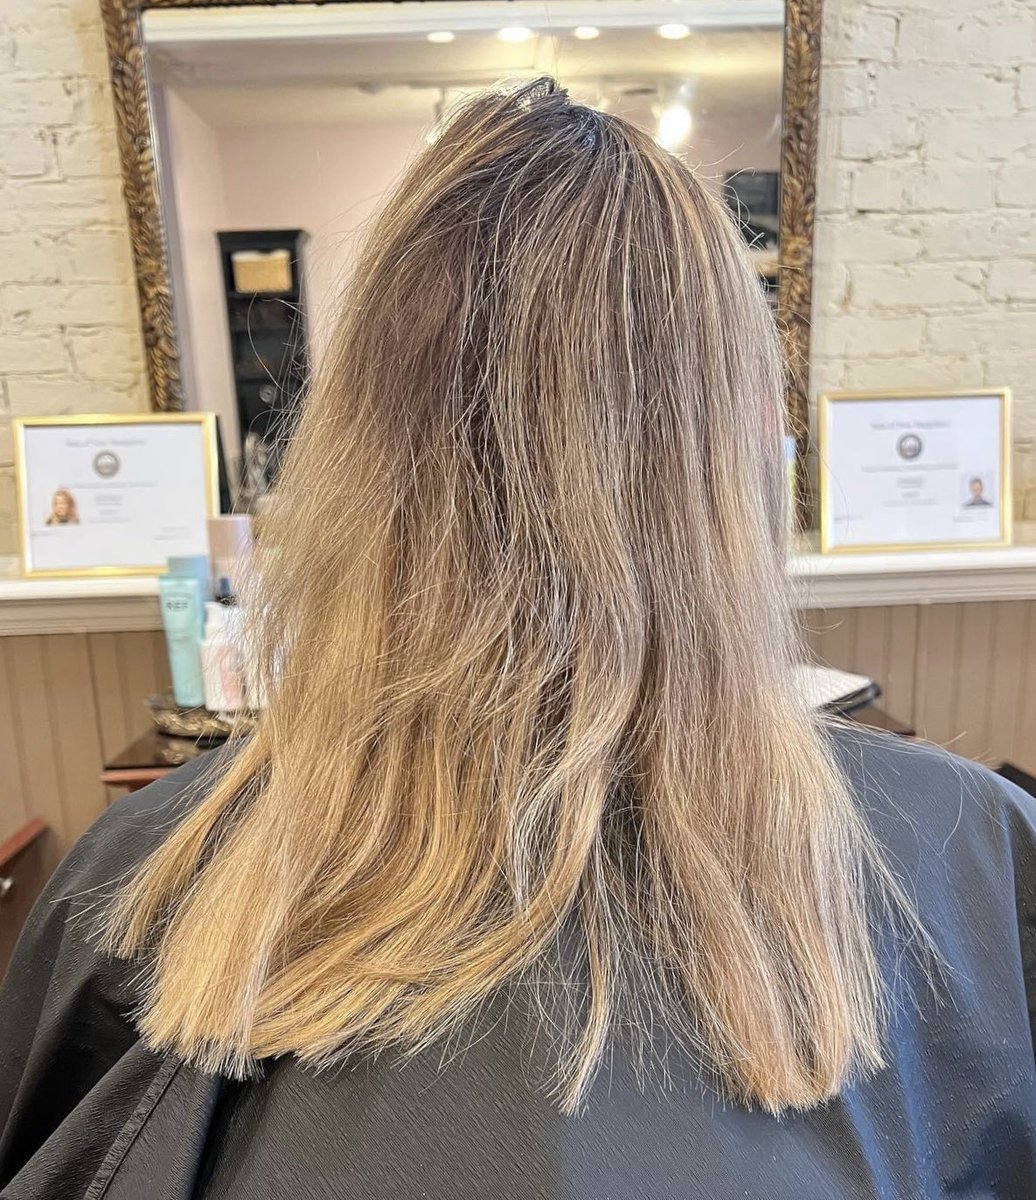 Beautiful balayage with some bright money pieces by Jilliane! Call or #bookonline at tranquilitynh.com.

#balayage #balayagehighlights #blondebalayage #blonde #blondehair #haircut #haircolor #haircolorist #blondespecialist